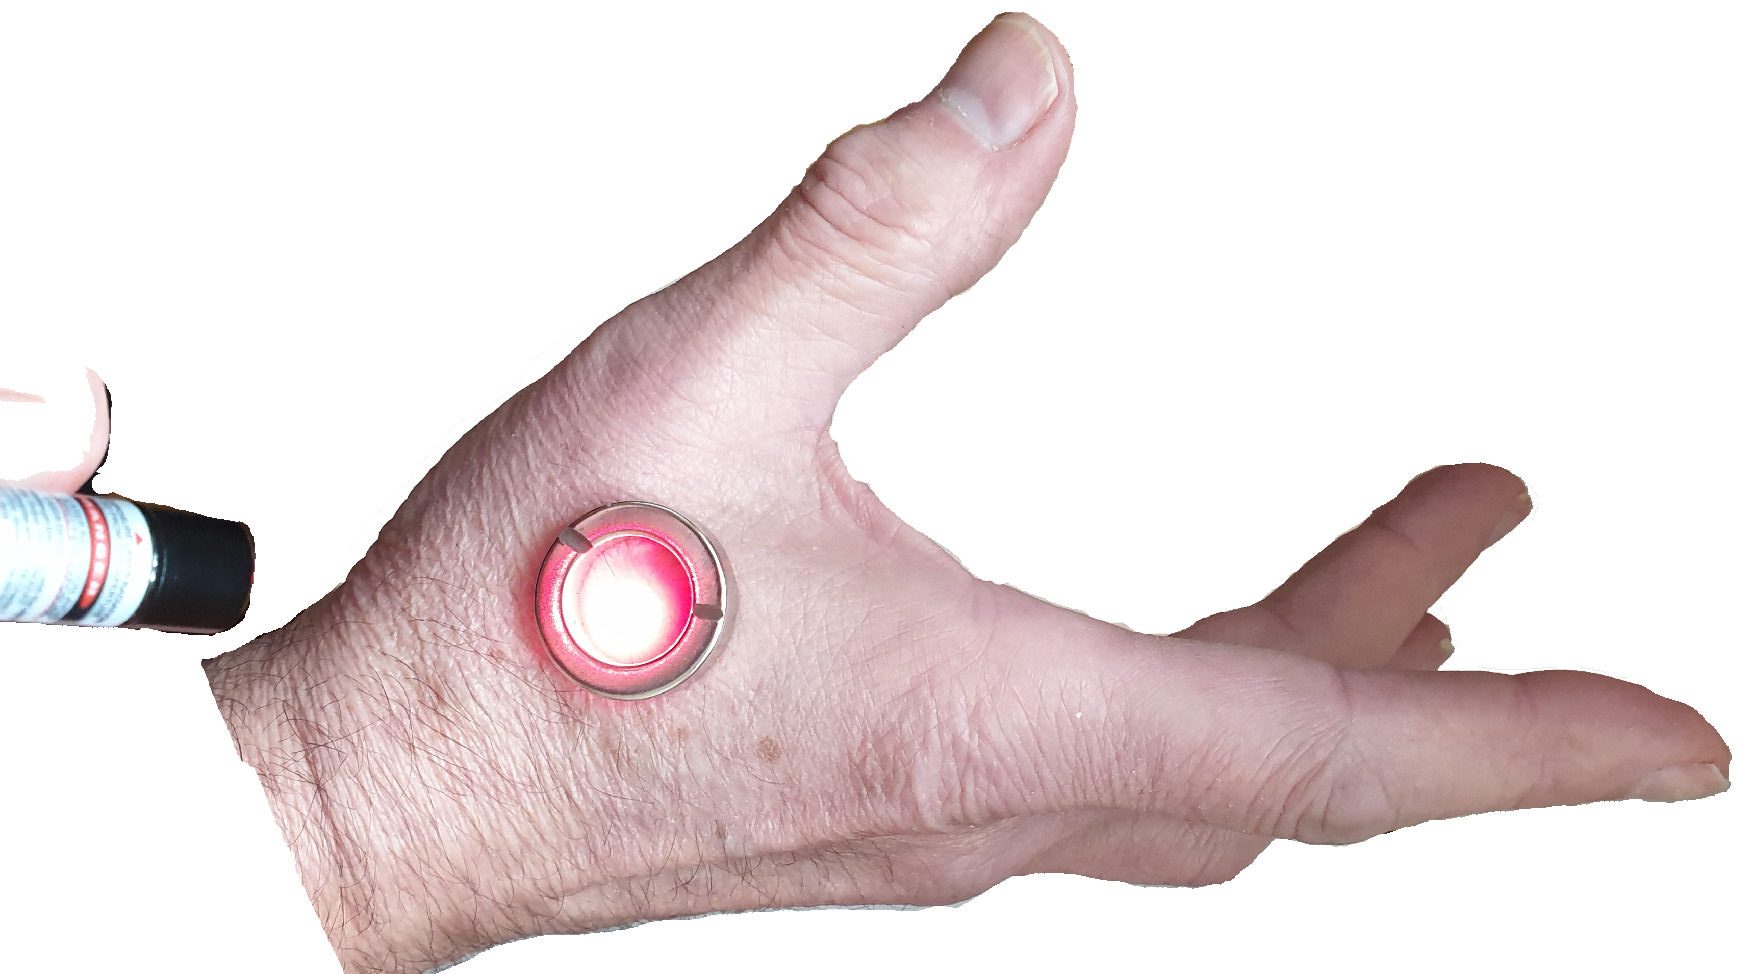 Red later and magnet treatment on an acupuncture point on the hand